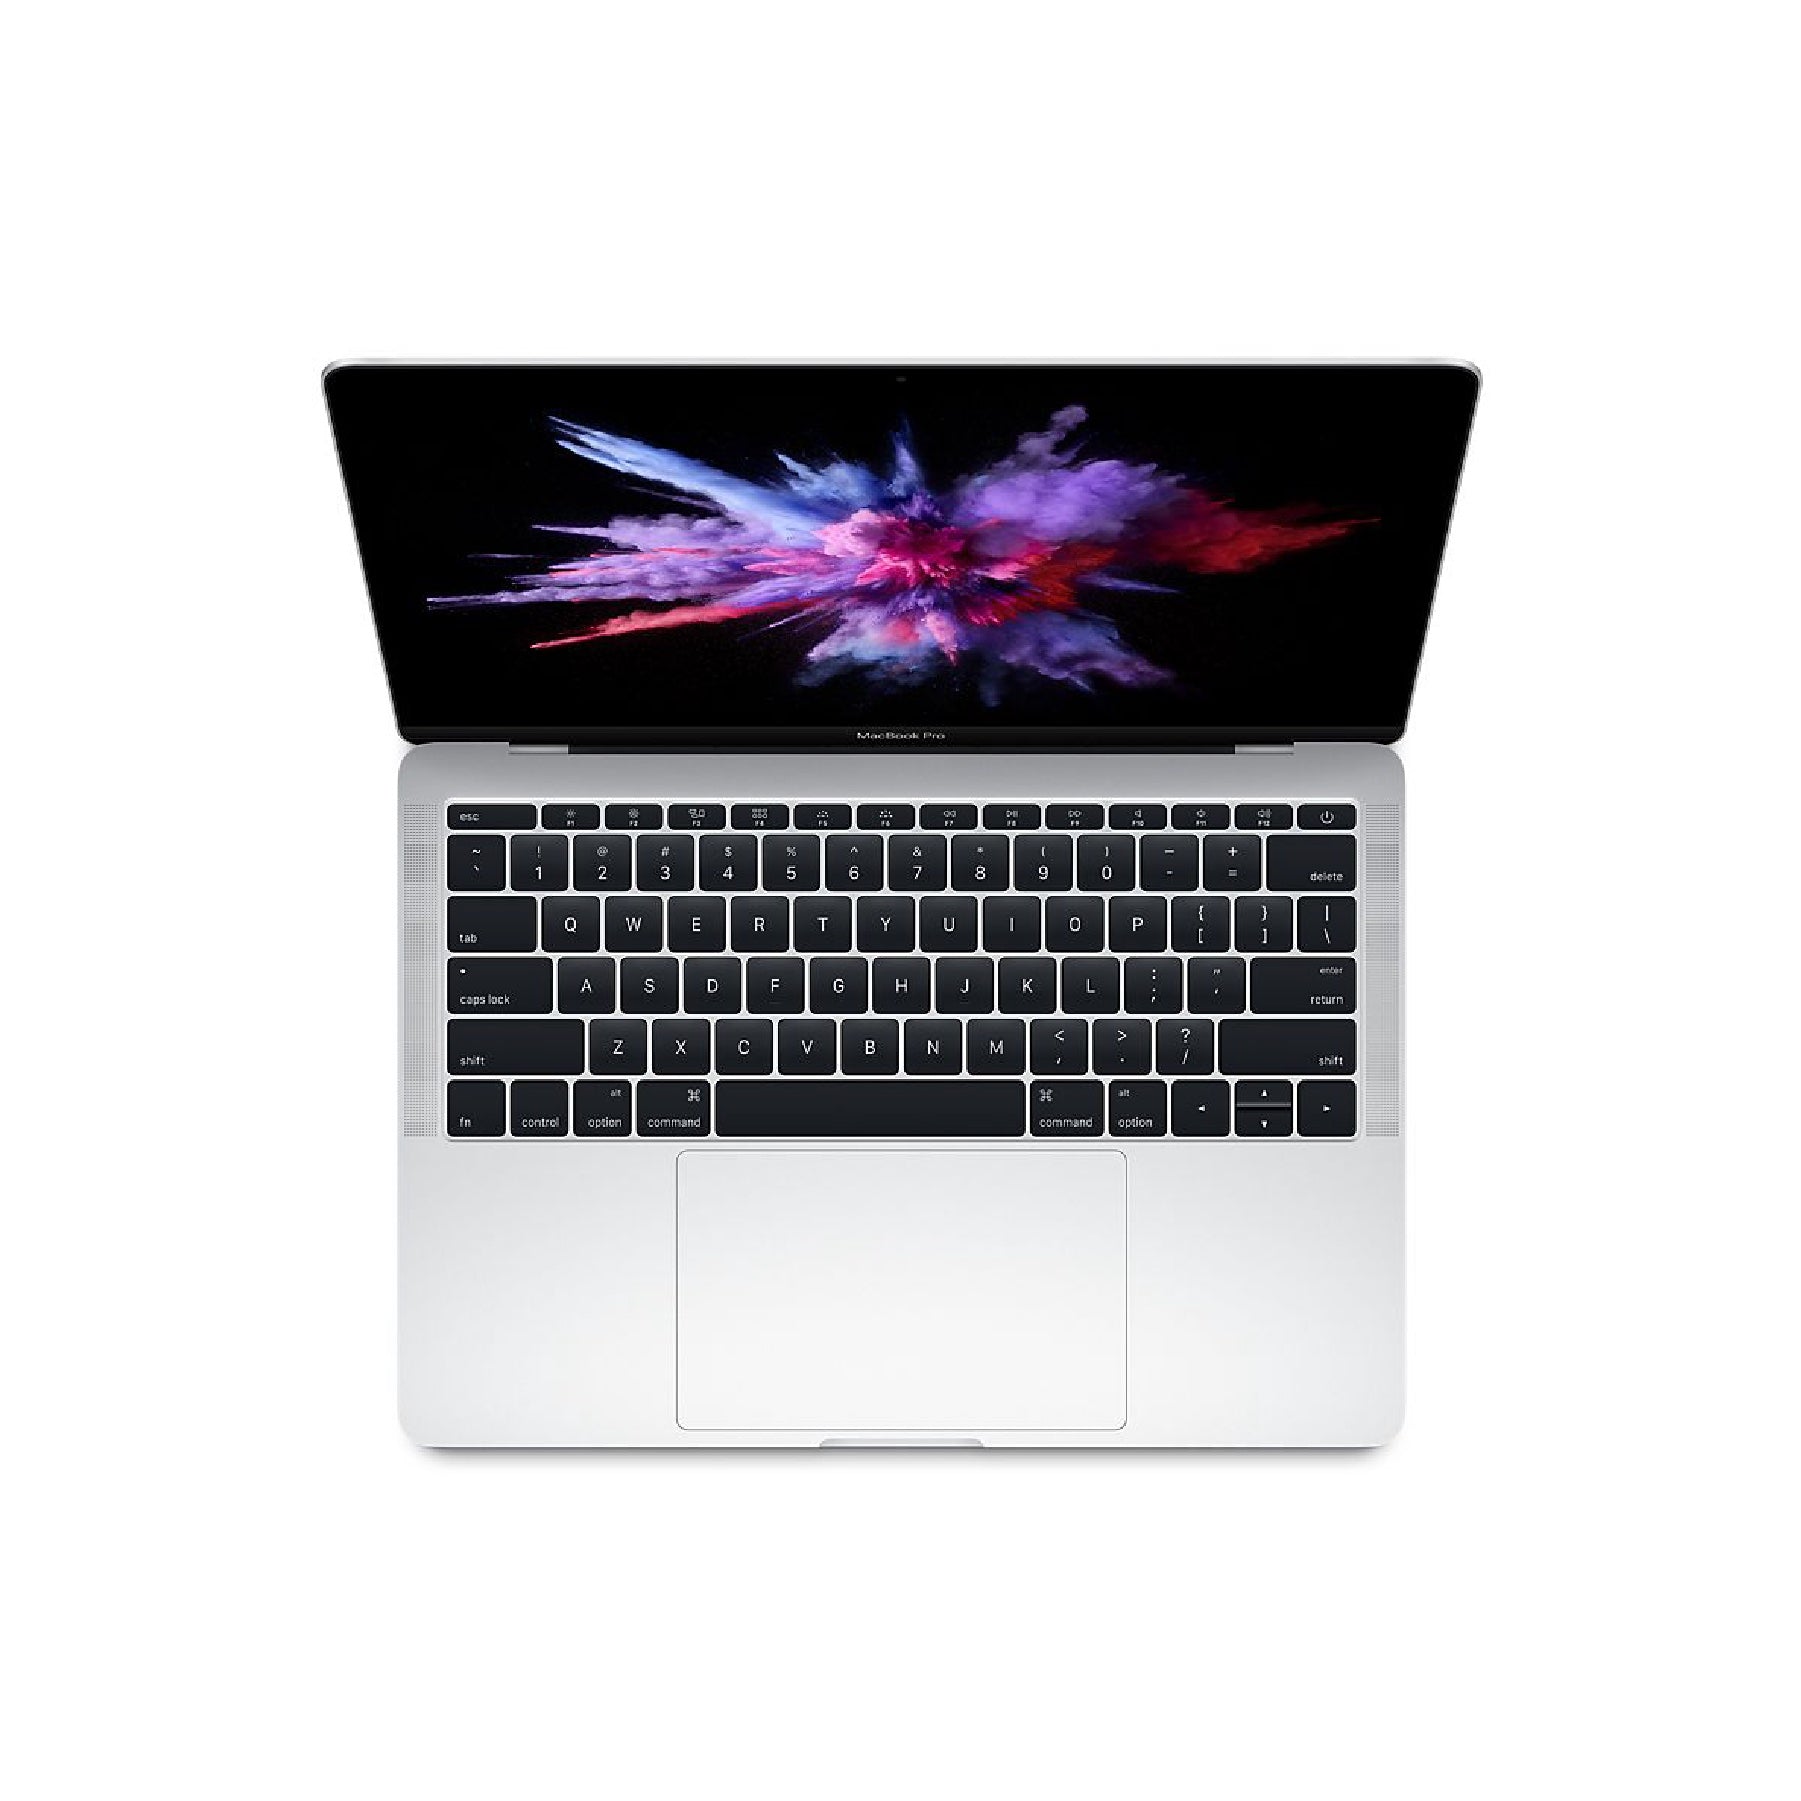 MacBook Pro (13-inch, 2017, Two Thunderbolt 3 ports) 2.3GHz Intel Core i5 256GB - Silver (Better) - iStore Pre-owned